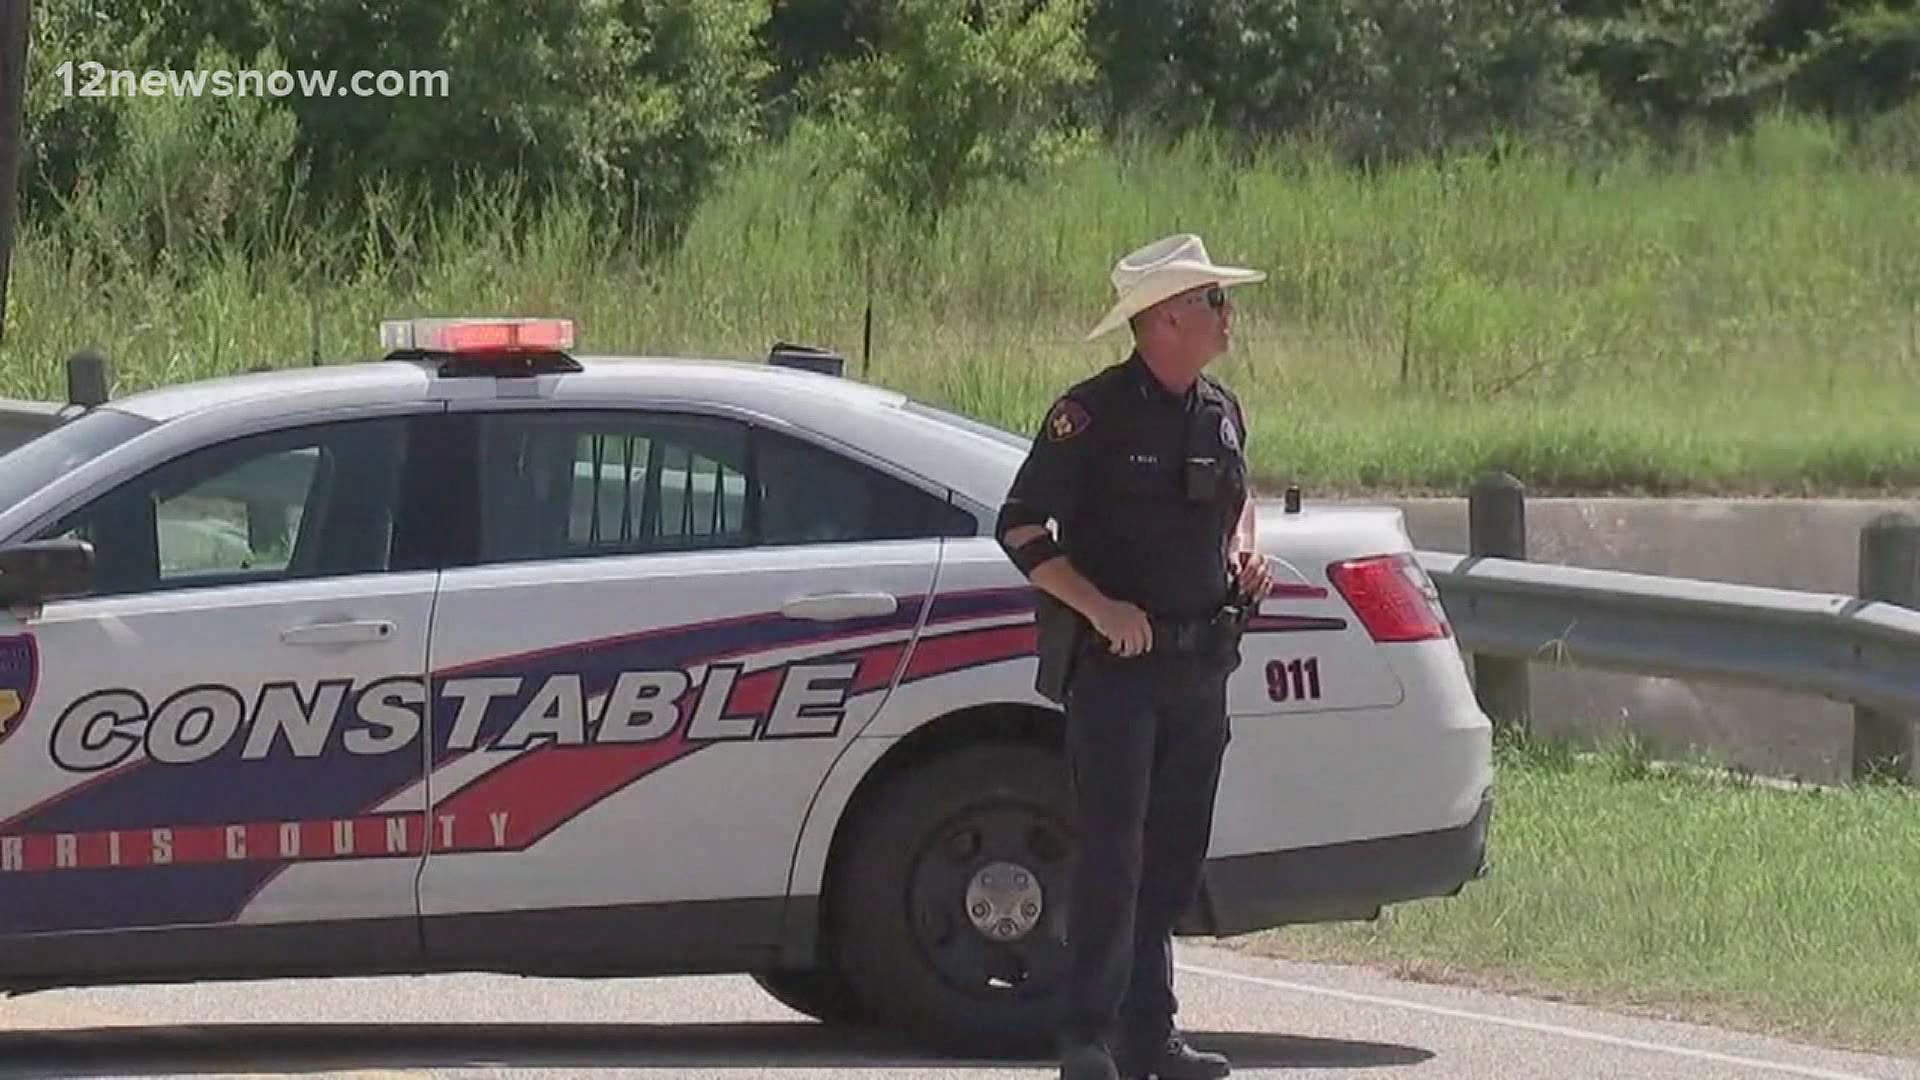 Chambers County families claim land was stolen by fraudulent county officials, three dead after Harris County shooting, Trump held rally in Arizona and more.